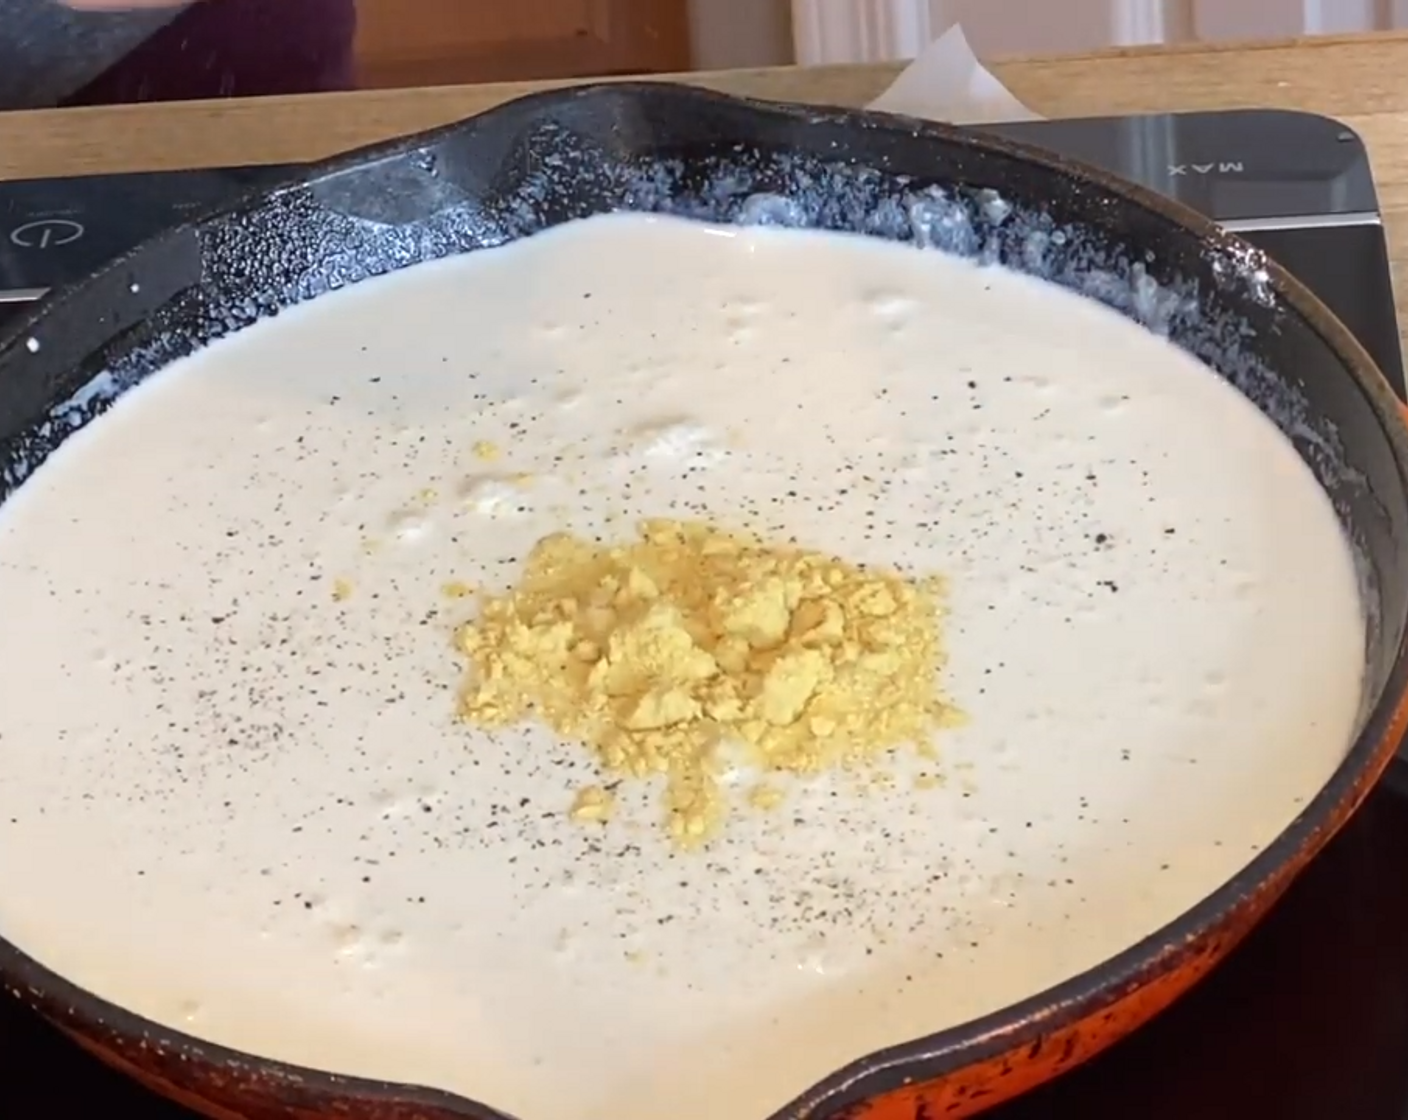 step 7 Reduce heat to medium and add Milk (1 cup), Heavy Cream (2 cups), Dry Mustard (1 tsp), and Ground Black Pepper (1/2 tsp). Whisk until it begins to bubble.